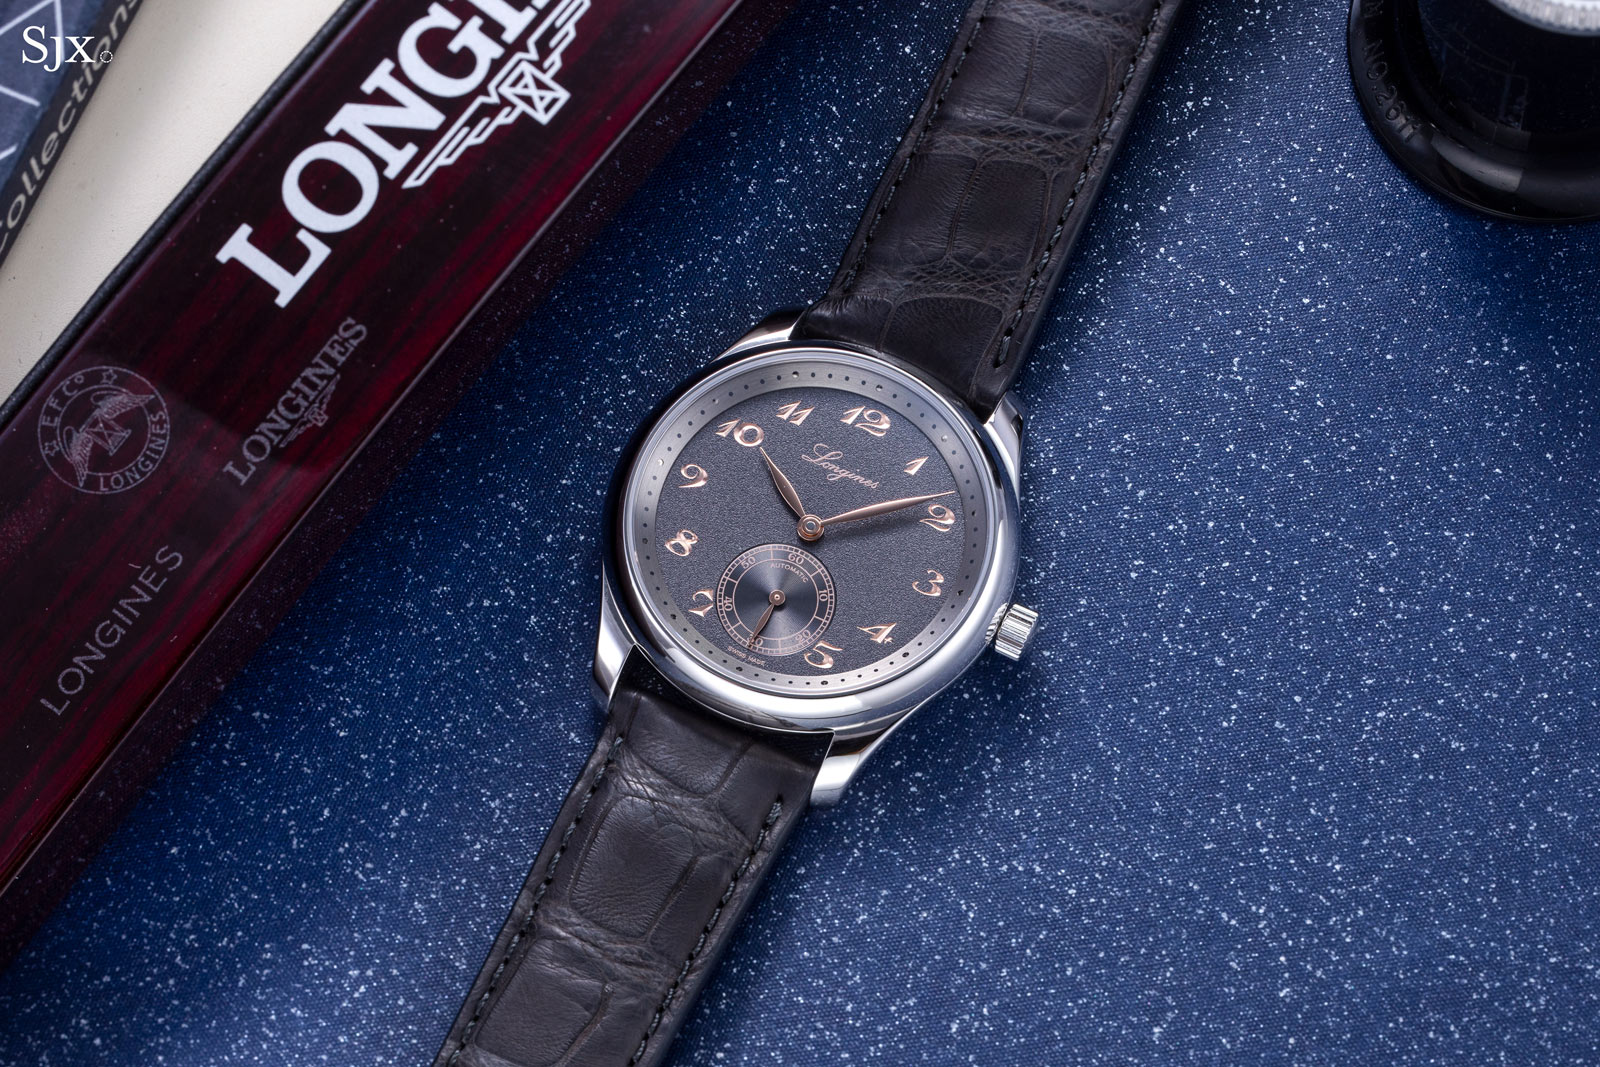 Hands On: Longines Master Collection Small Seconds | SJX Watches